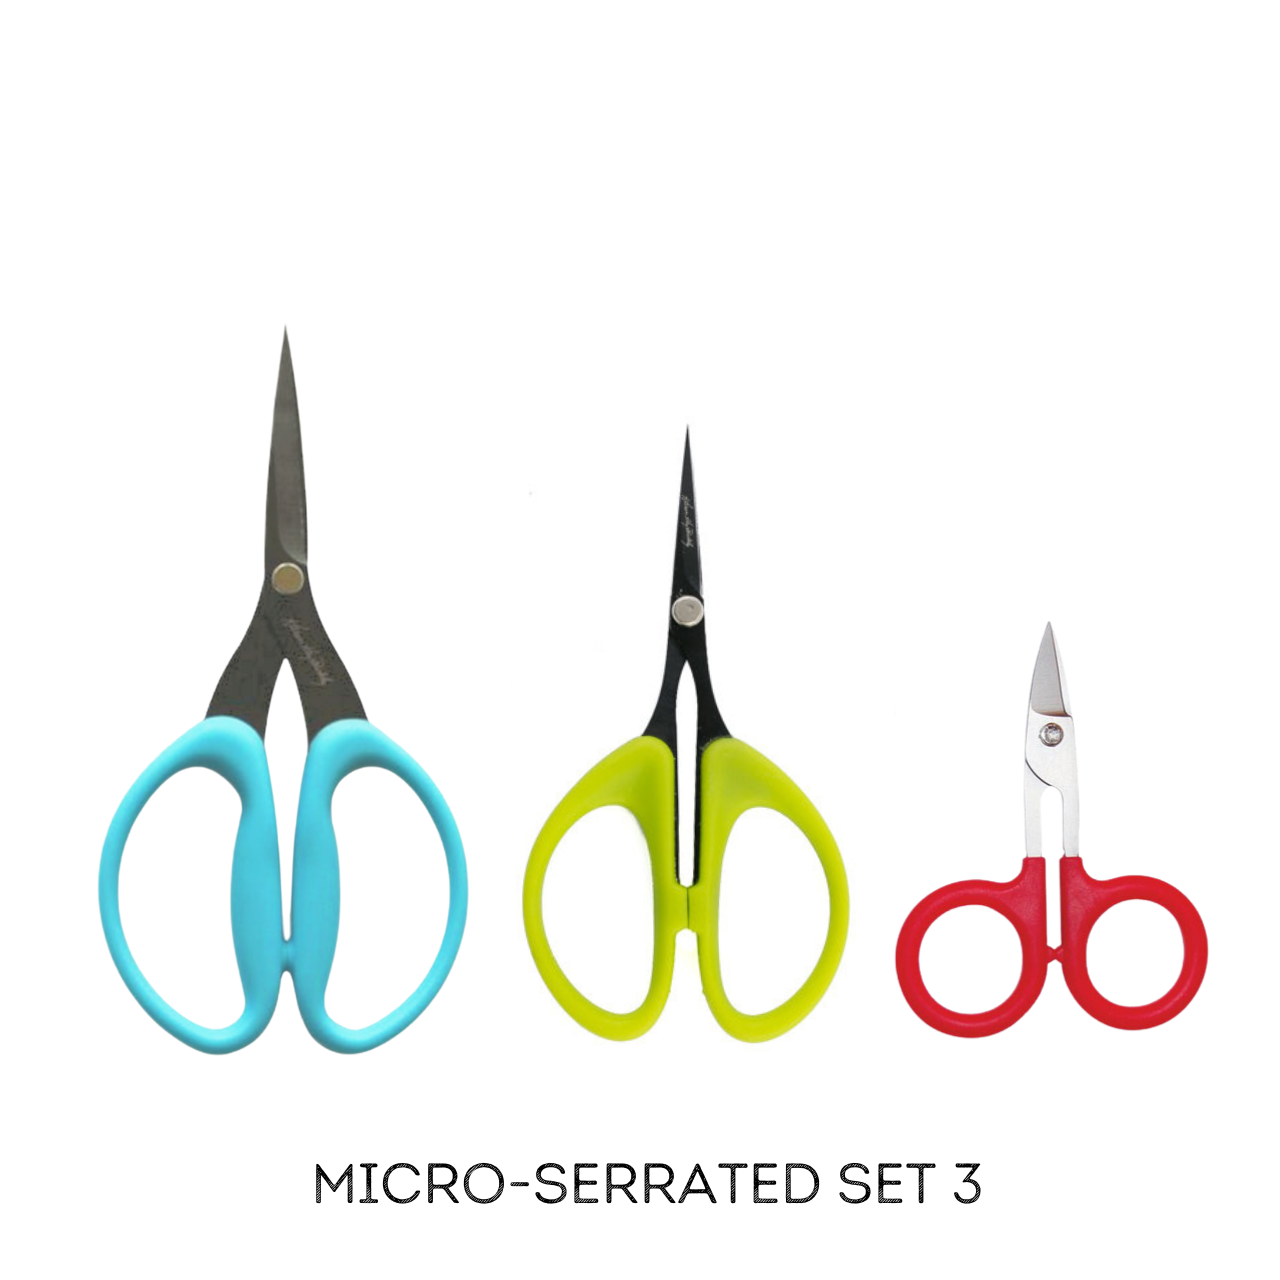 Micro Serrated Perfect Scissors set 3 - Karen Kay Buckley available from 2 Sew Textiles - art quilt supplies